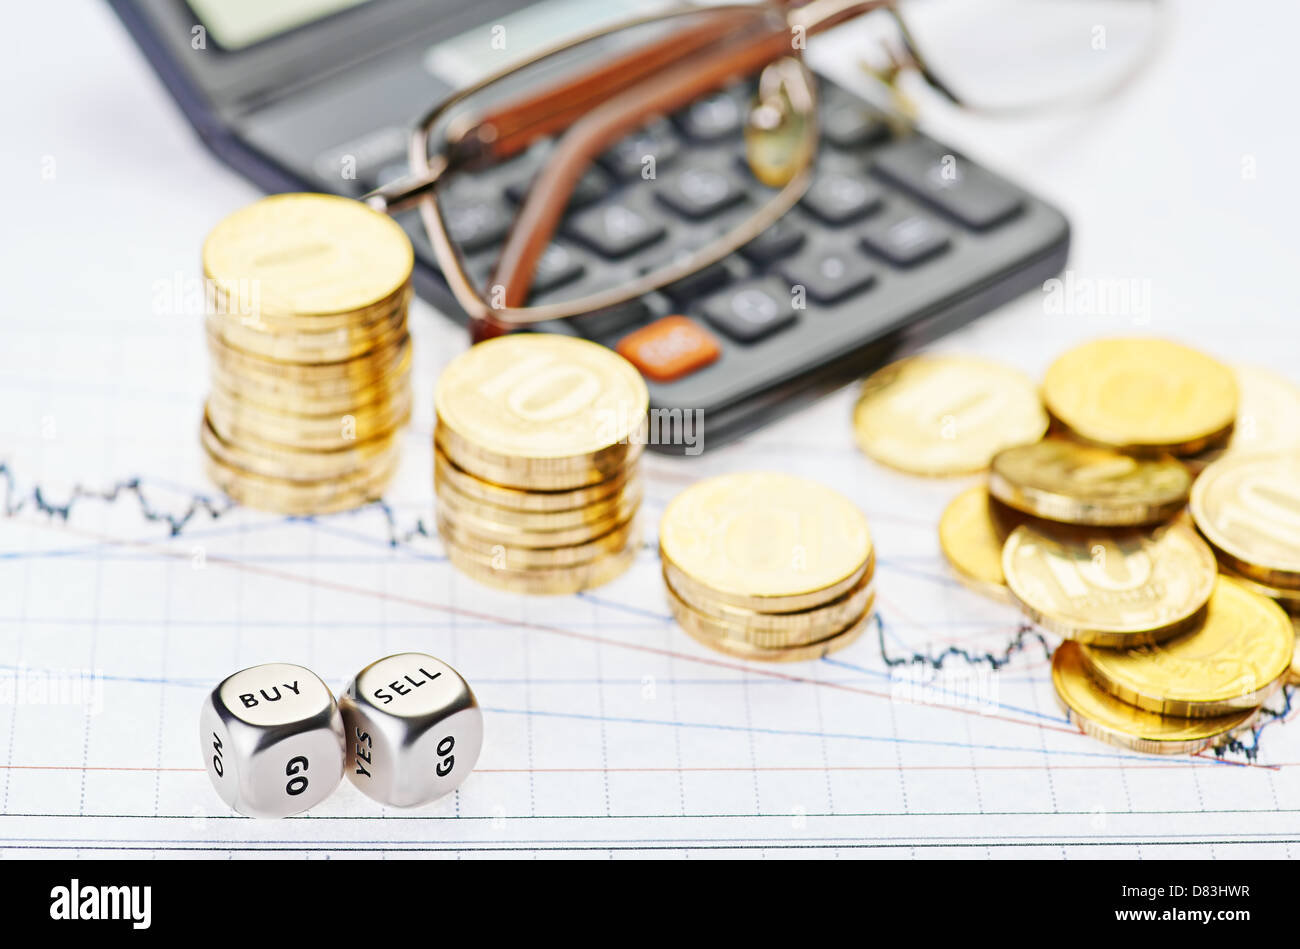 Downtrend stacks coins, calculator, glasses and dices cubes with the words SELL BUY on the financial stock charts. Stock Photo